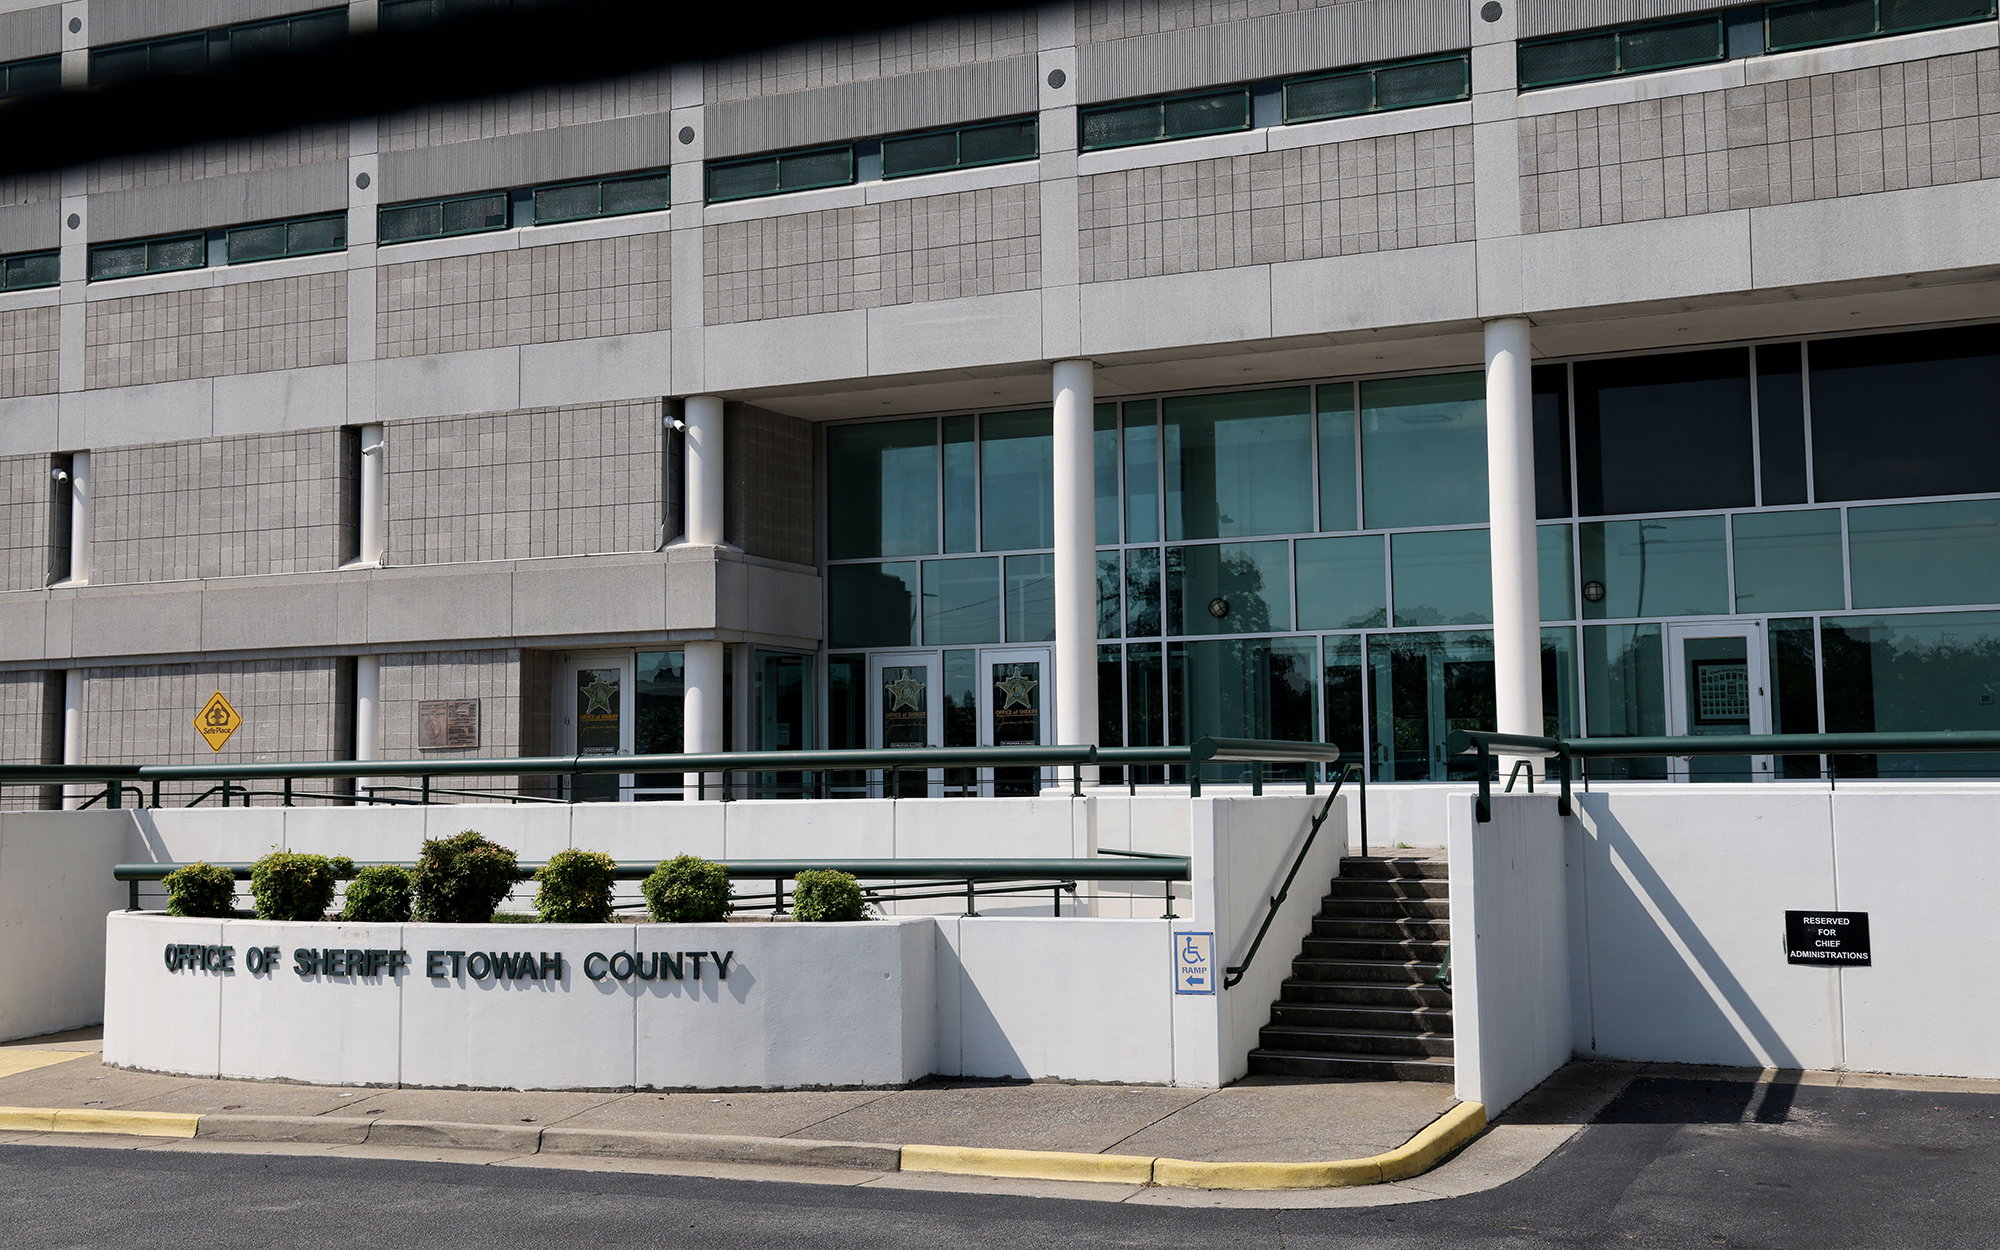 Etowah County has brought more charges of pregnancy-related chemical endangerment than any other county in the state, according to the group Pregnancy Justice. The Etowah County Sheriff’s Office is in Gadsden, in the northeastern part of the state. (Photo by Shelby Rae Wills/News21)